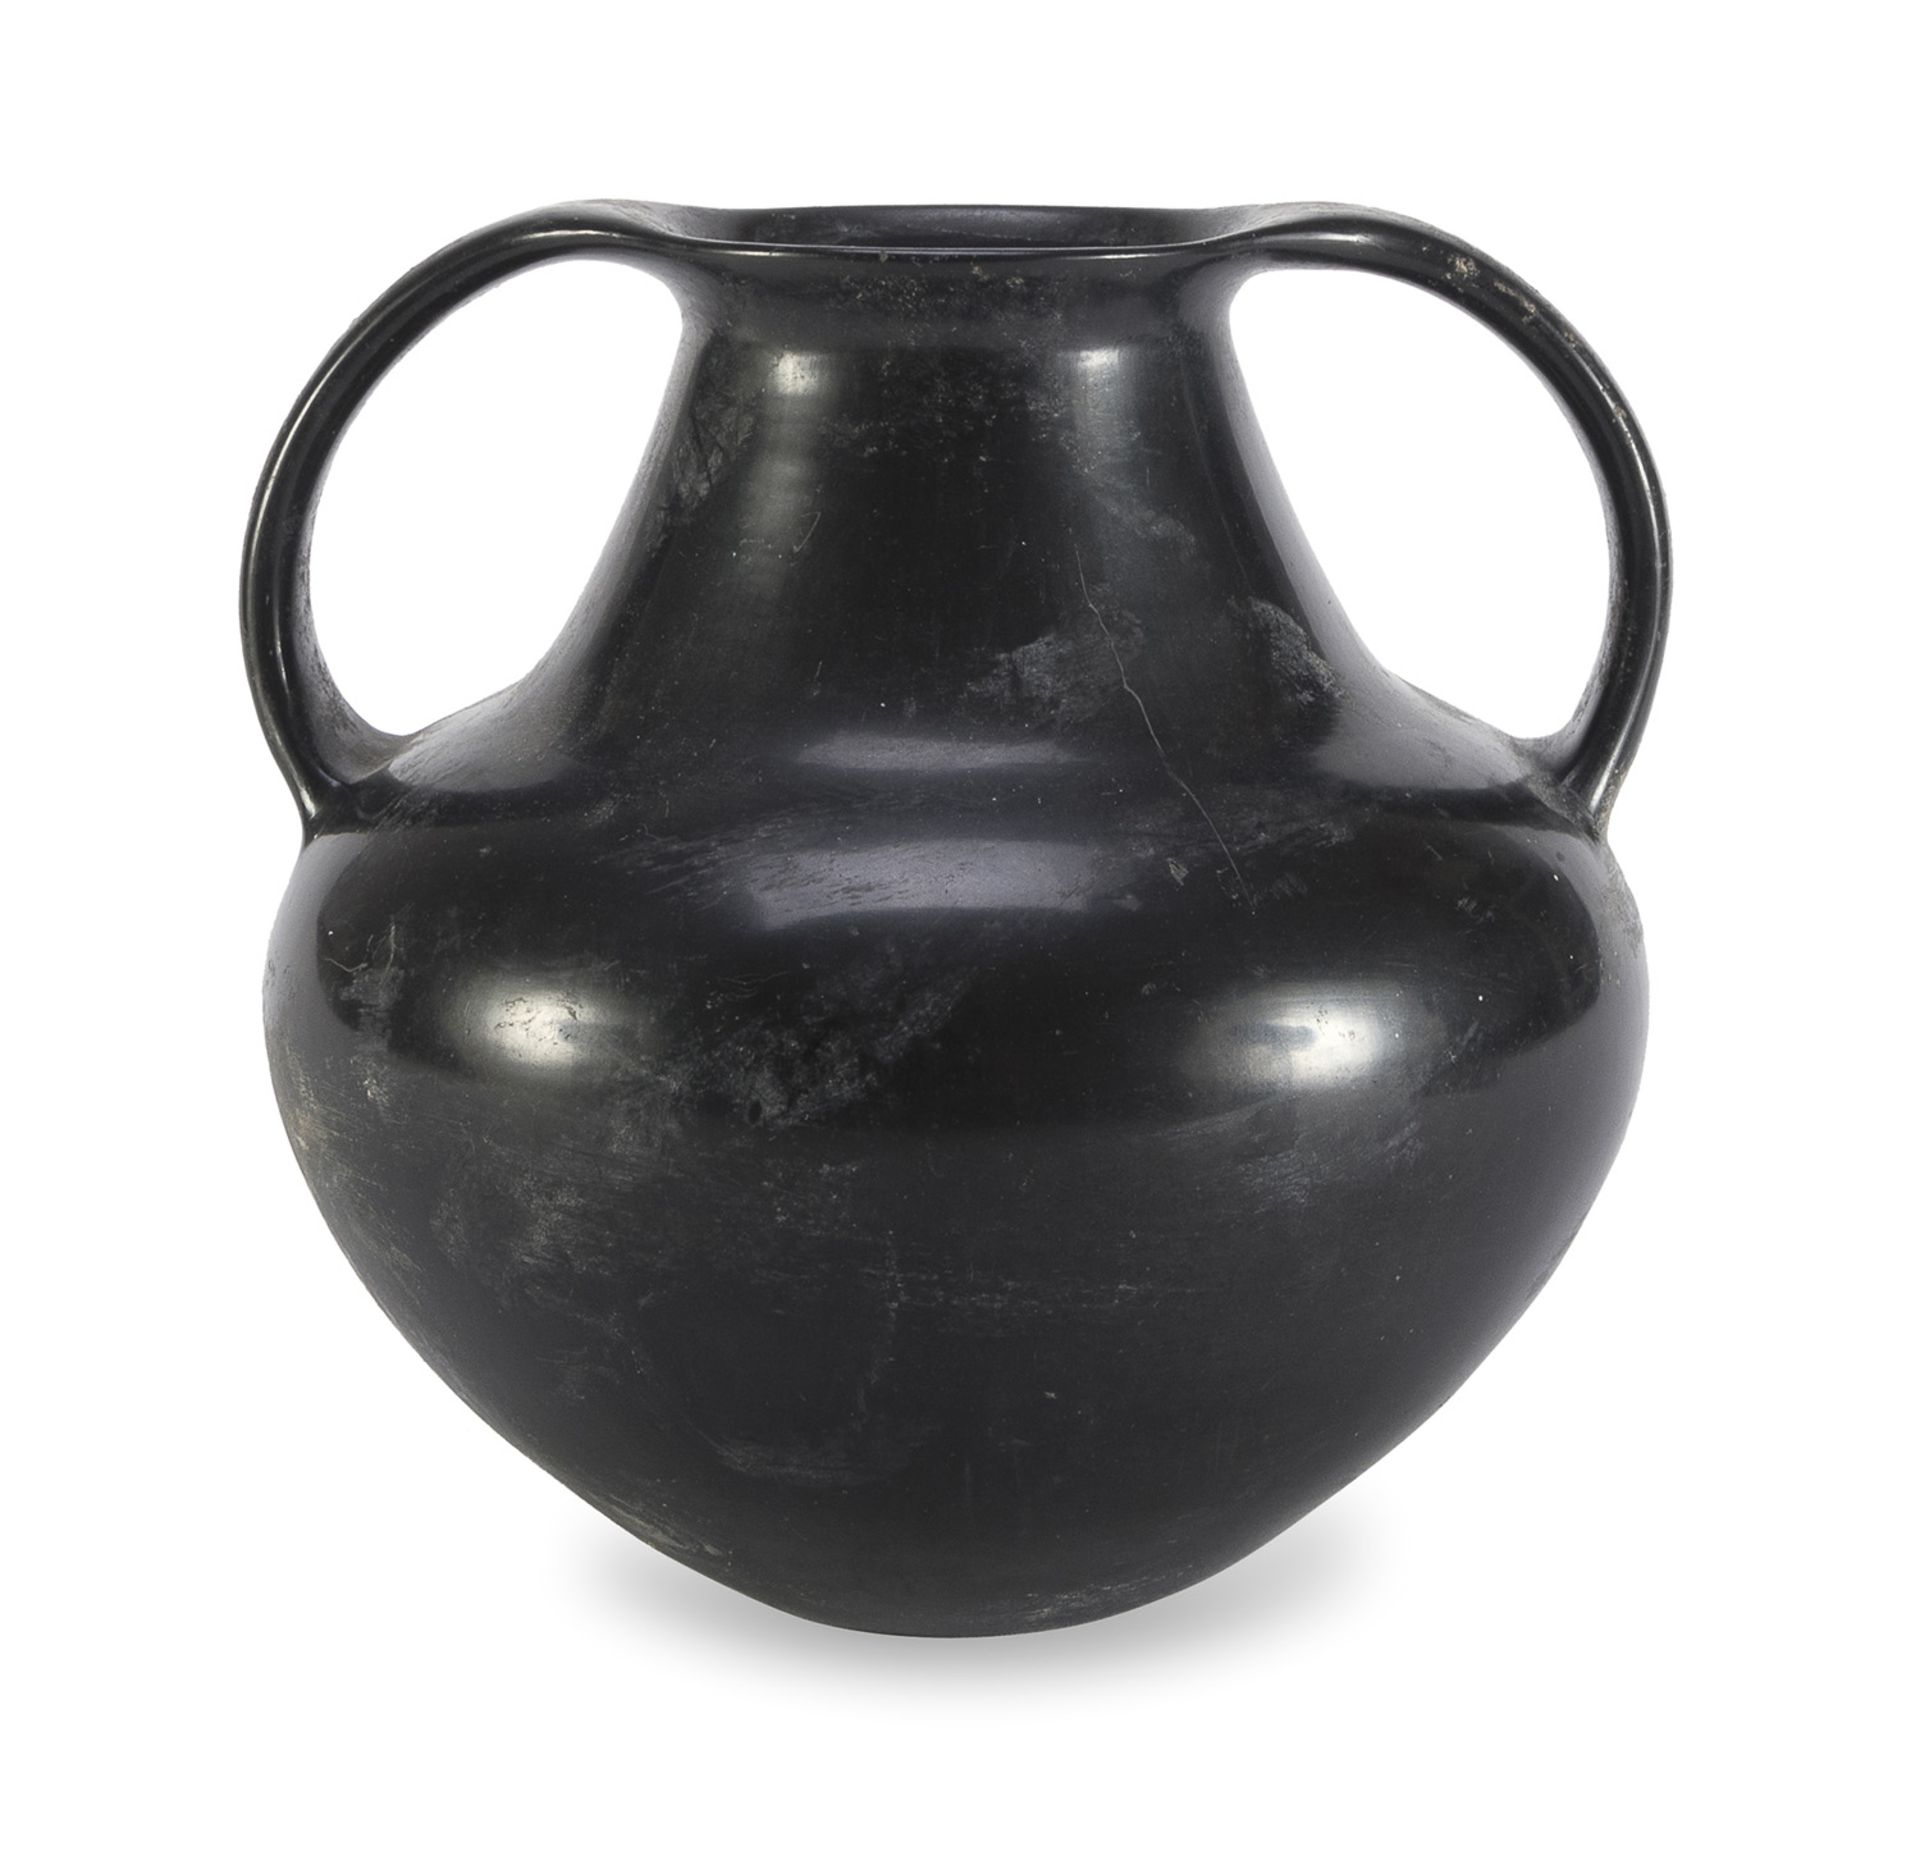 TWO-HANDLED OLLA ETRUSCAN STYLE 20th CENTURY (not exportable from Italy)